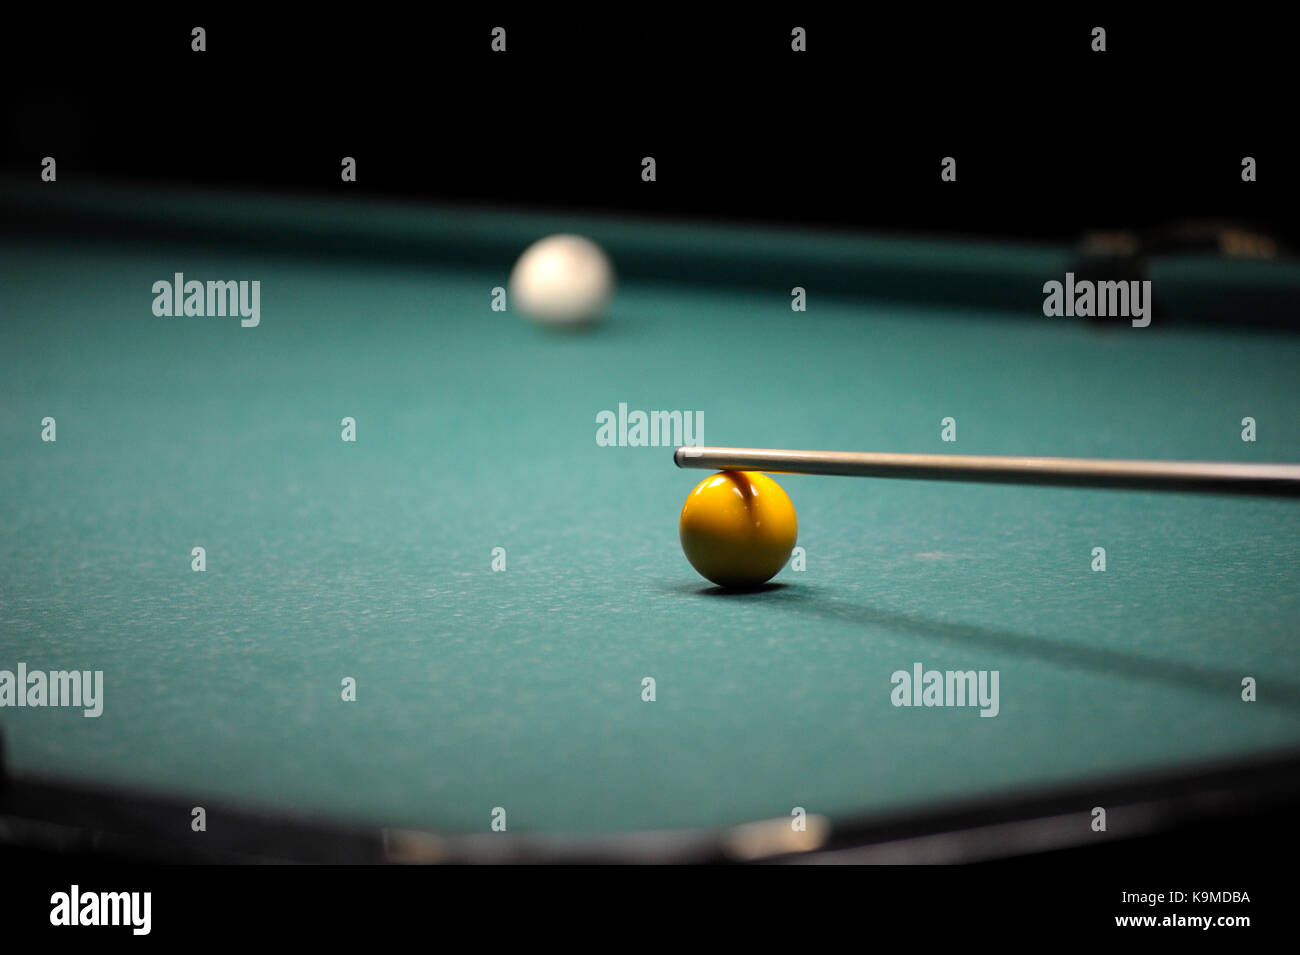 A cue stick and balls on a pool table Stock Photo